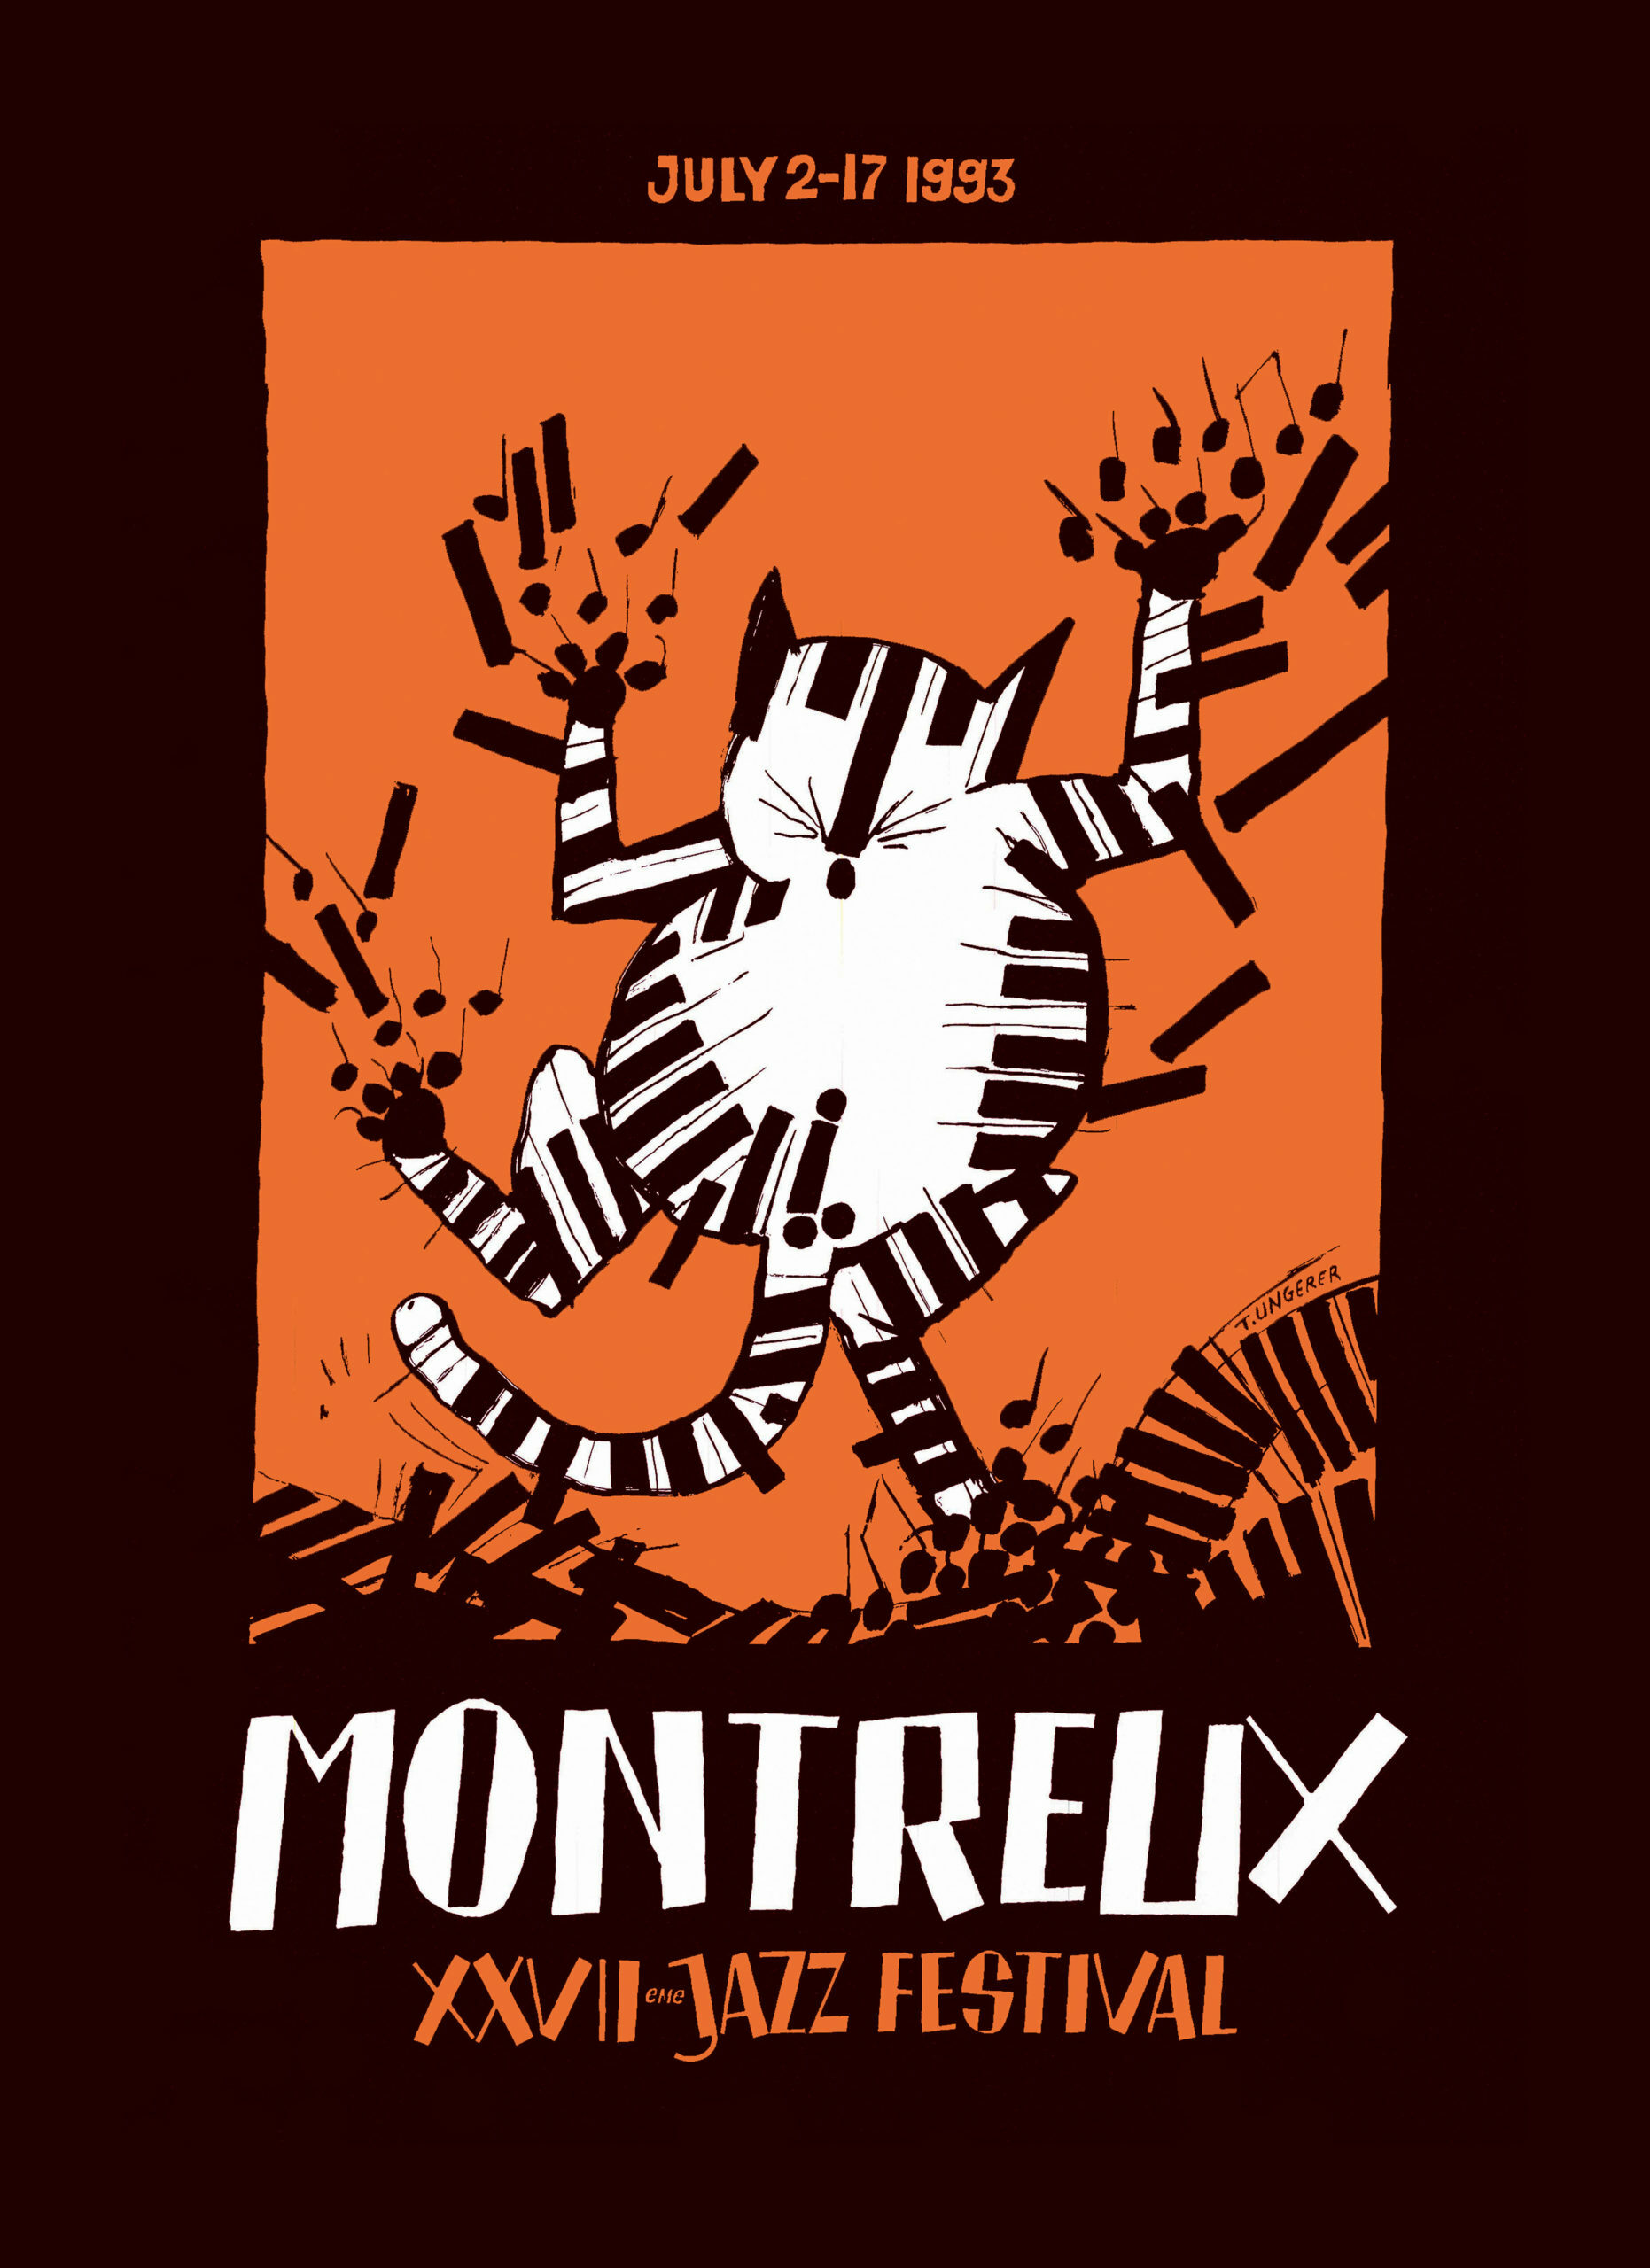 The posters - Montreux Jazz Festival